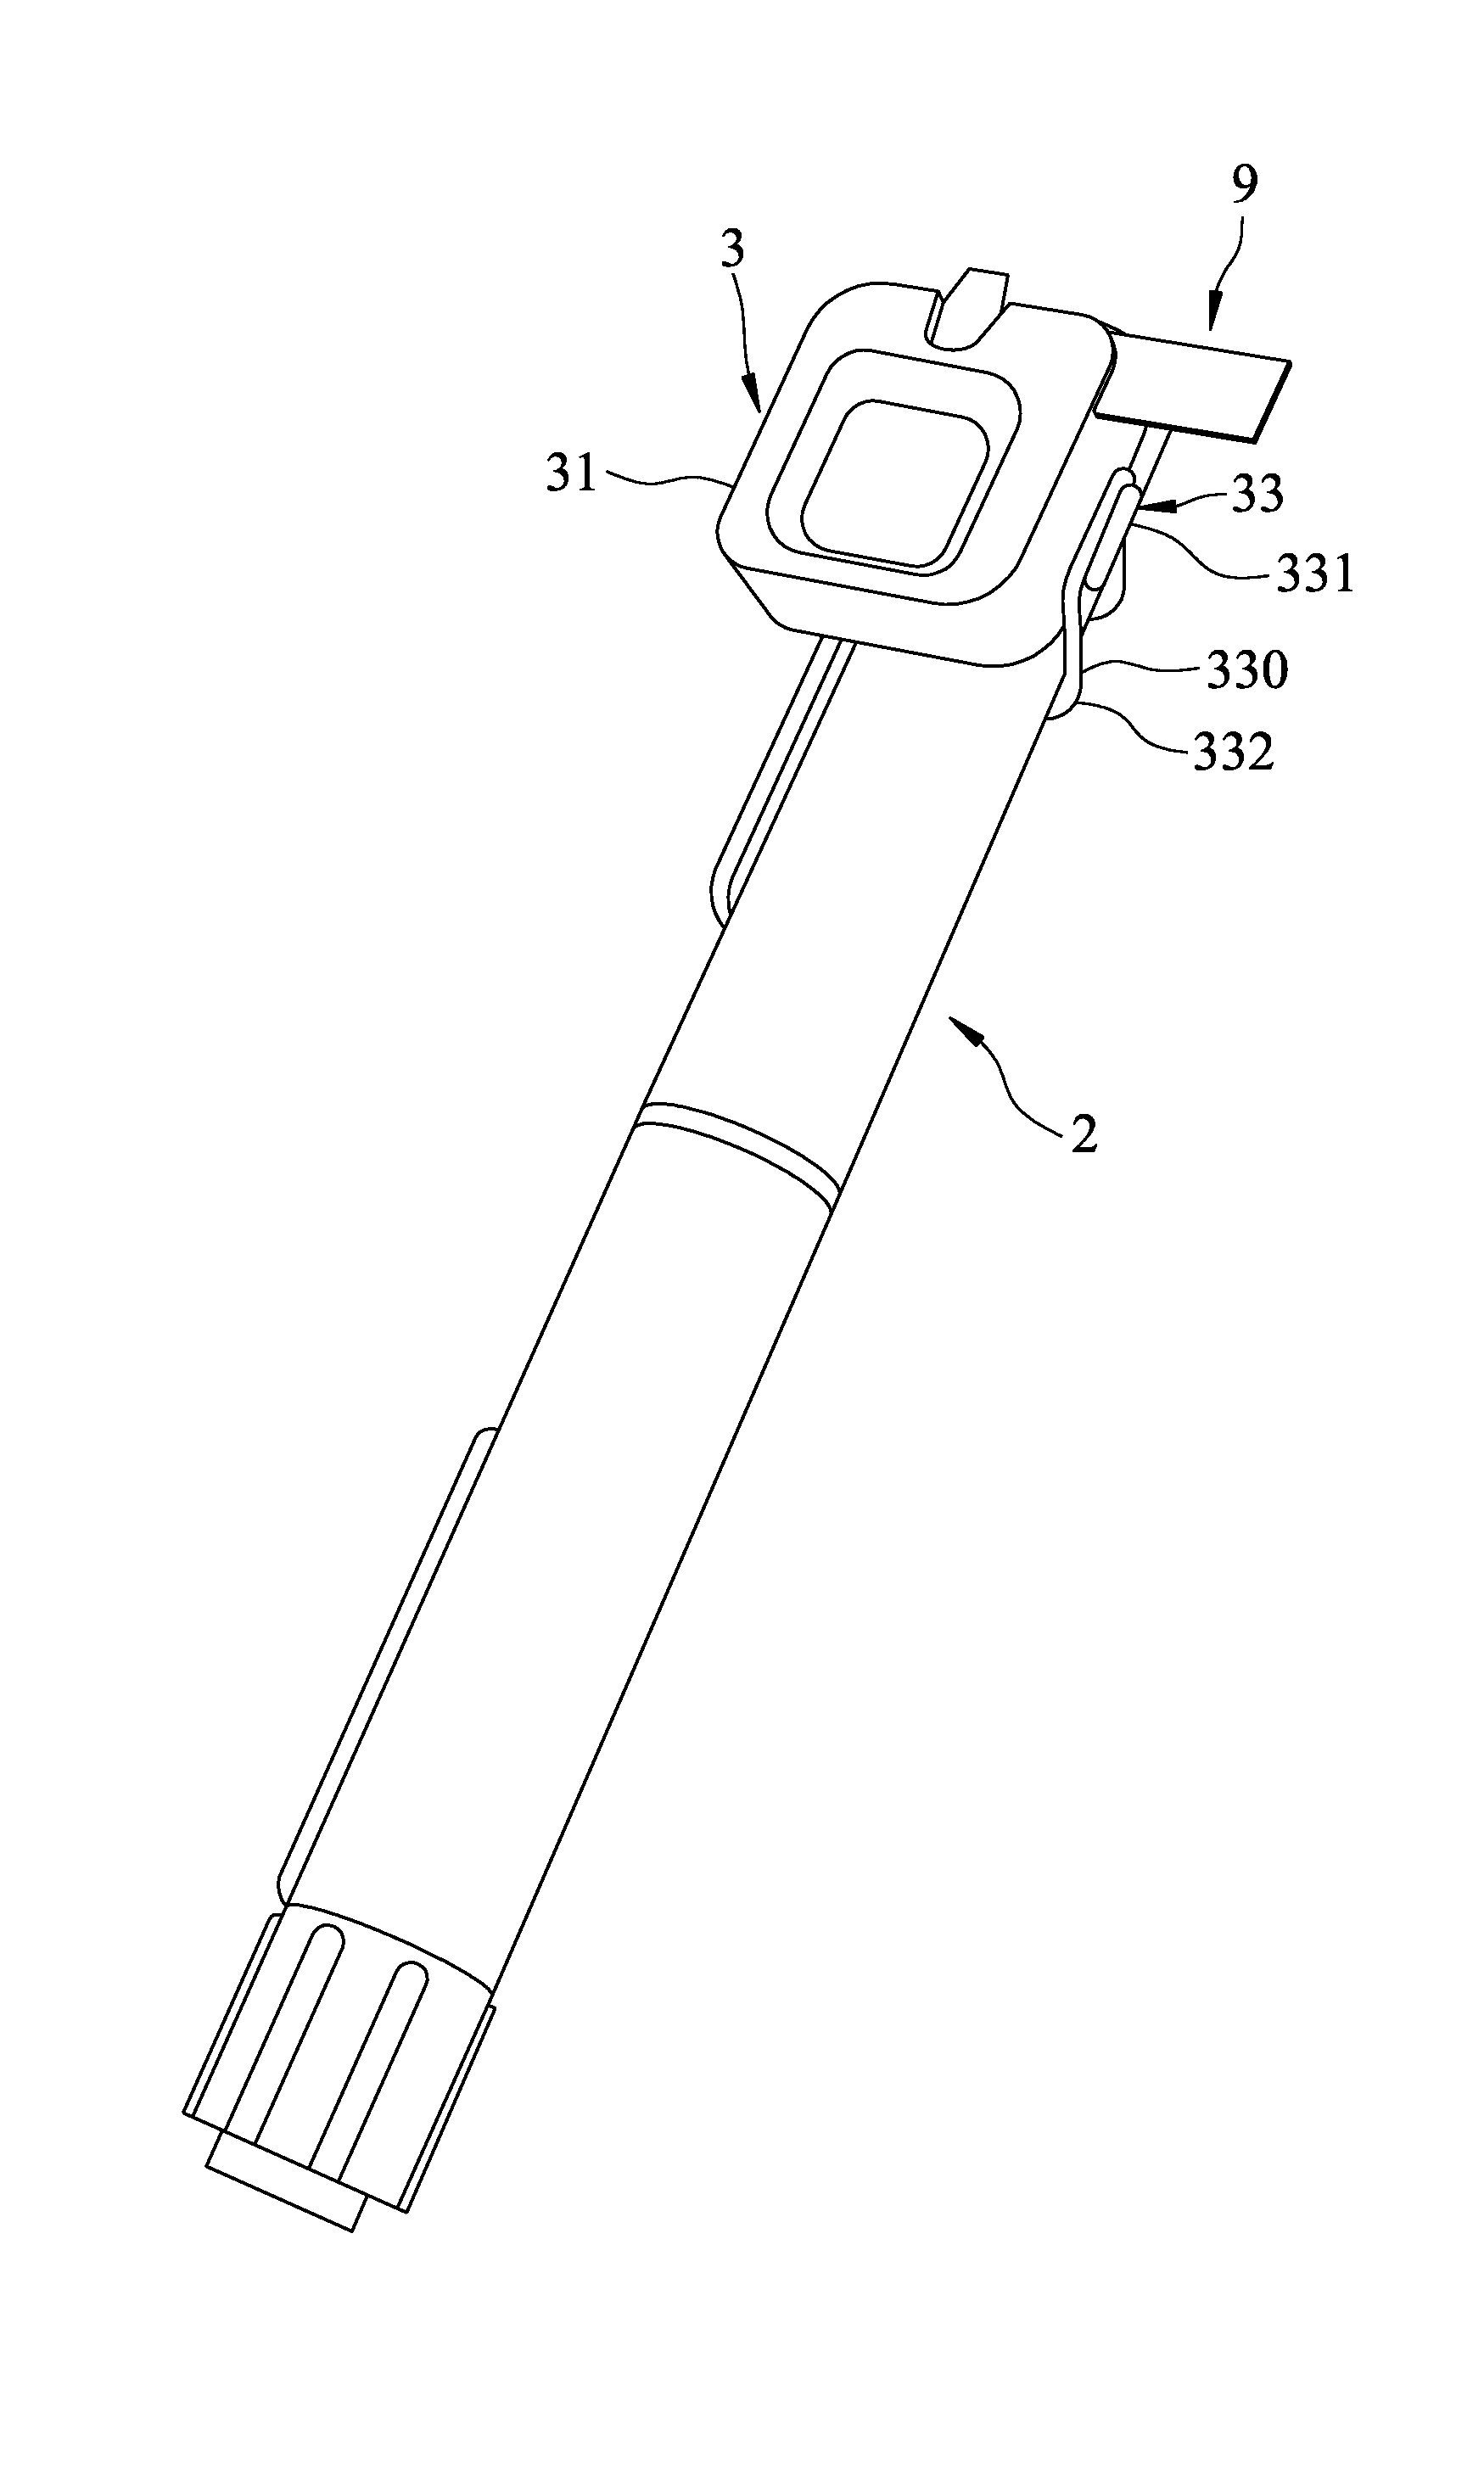 Measuring Device for an Analyte